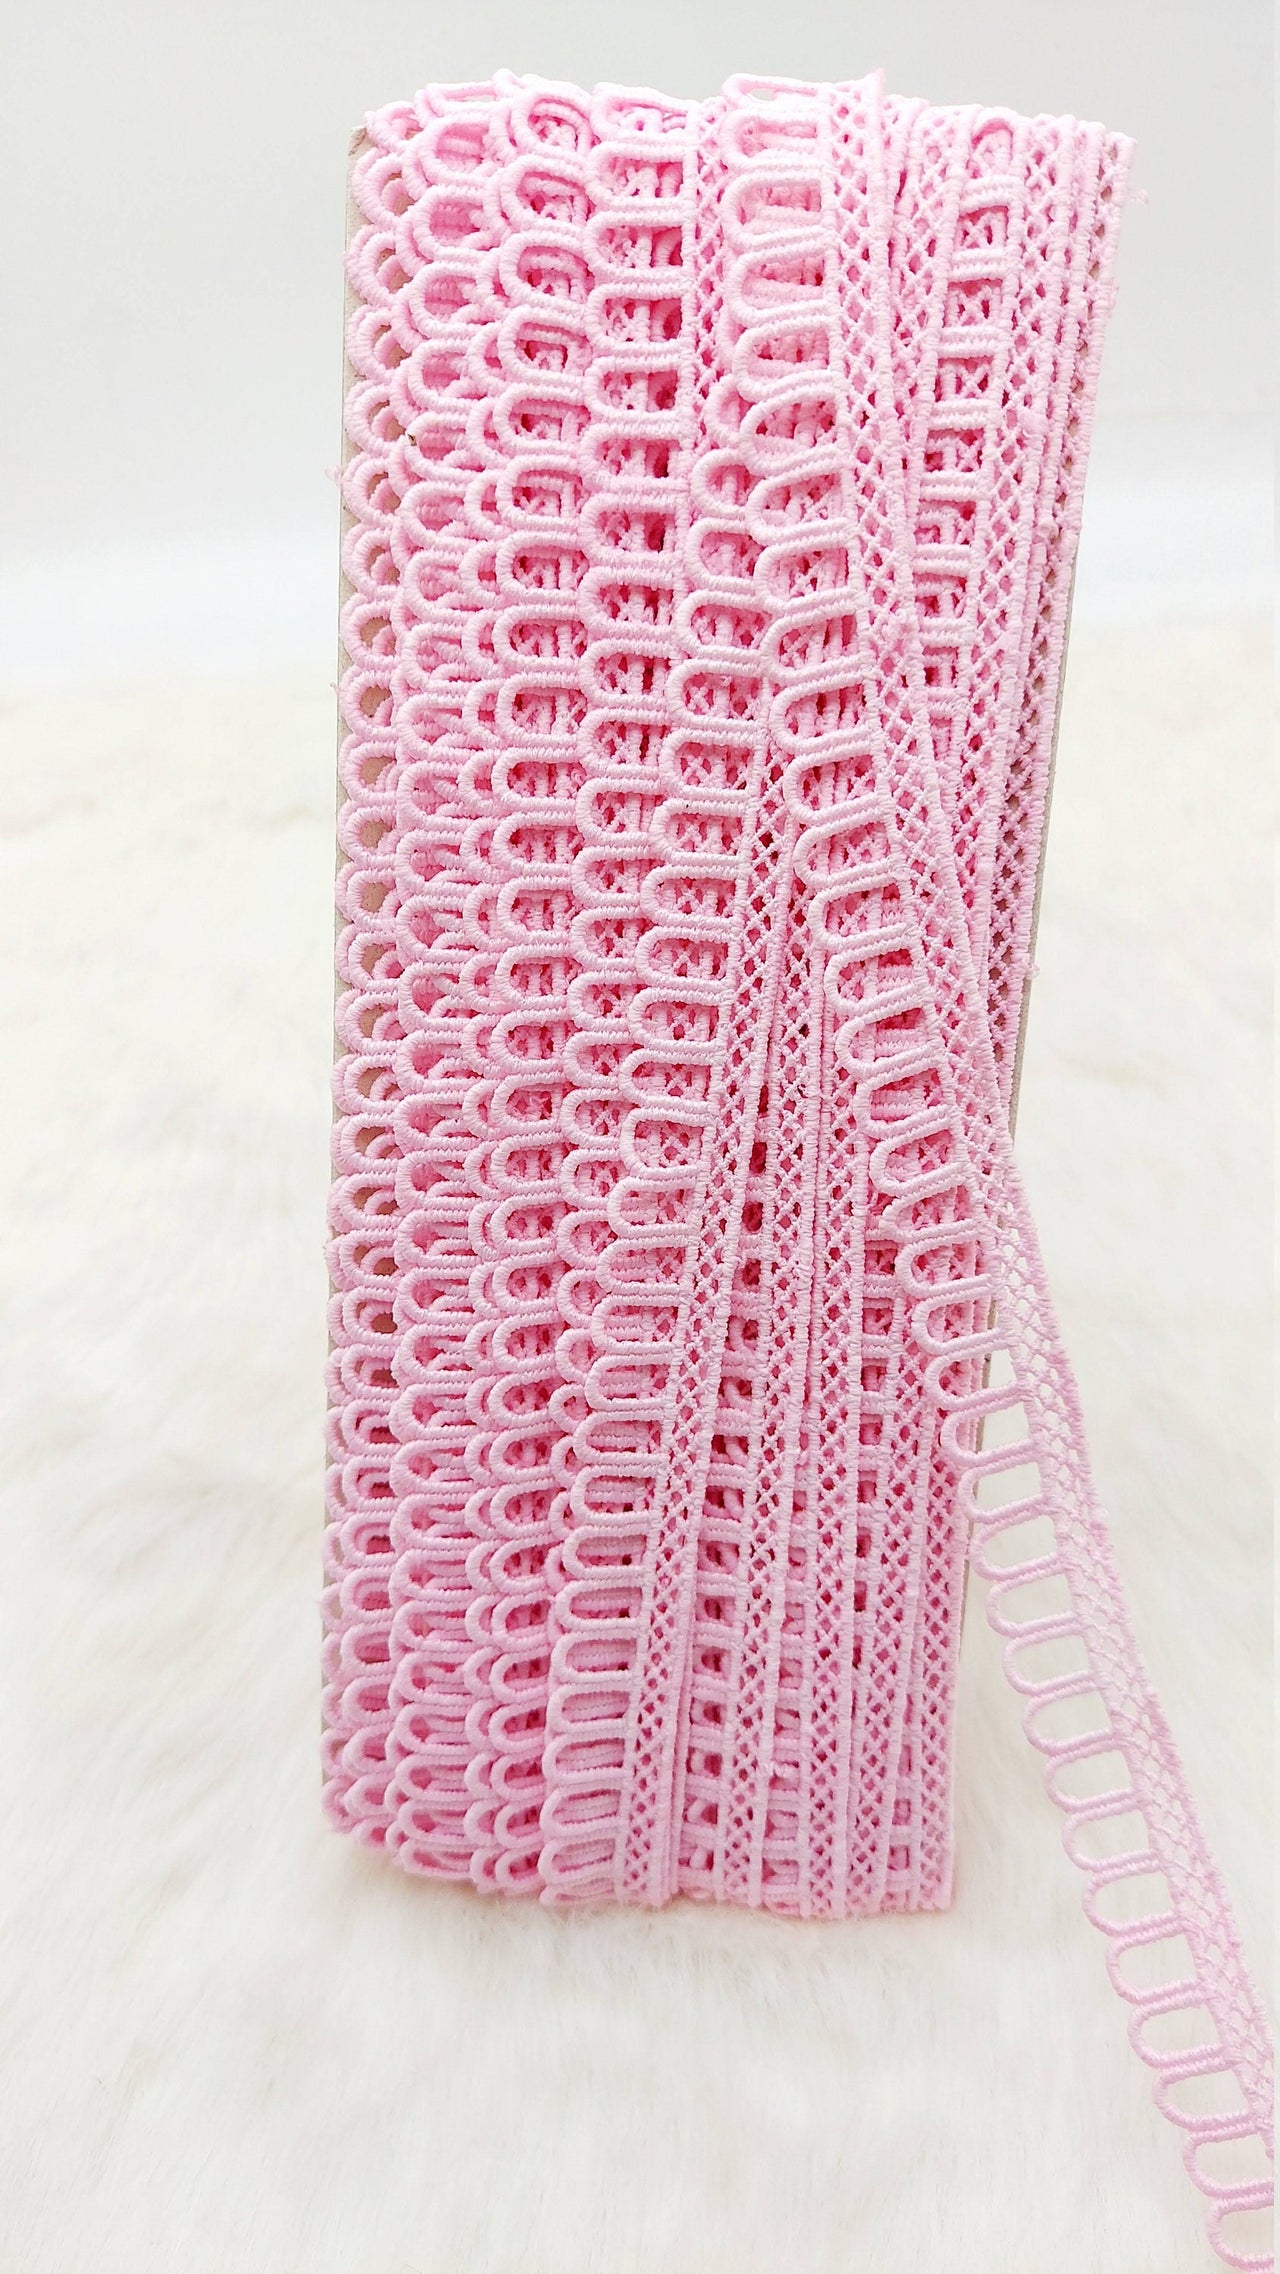 9 Yards Pink Embroidery Cotton Lace Trim, Approx. 20mm Wide, Fringe Trim